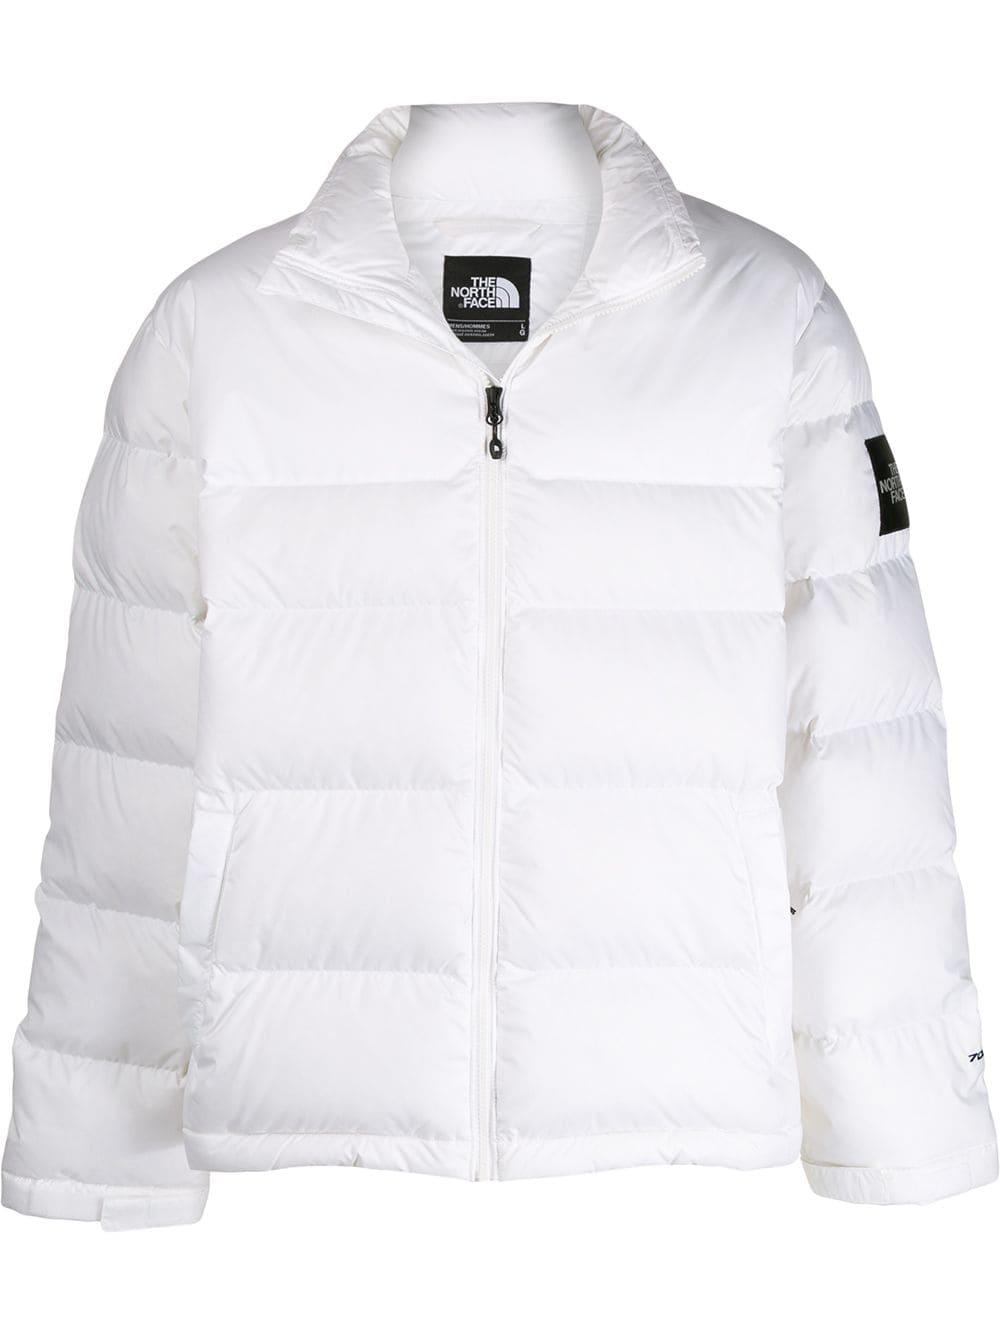 The North Face Synthetic High-neck Puffer Jacket in White for Men - Lyst